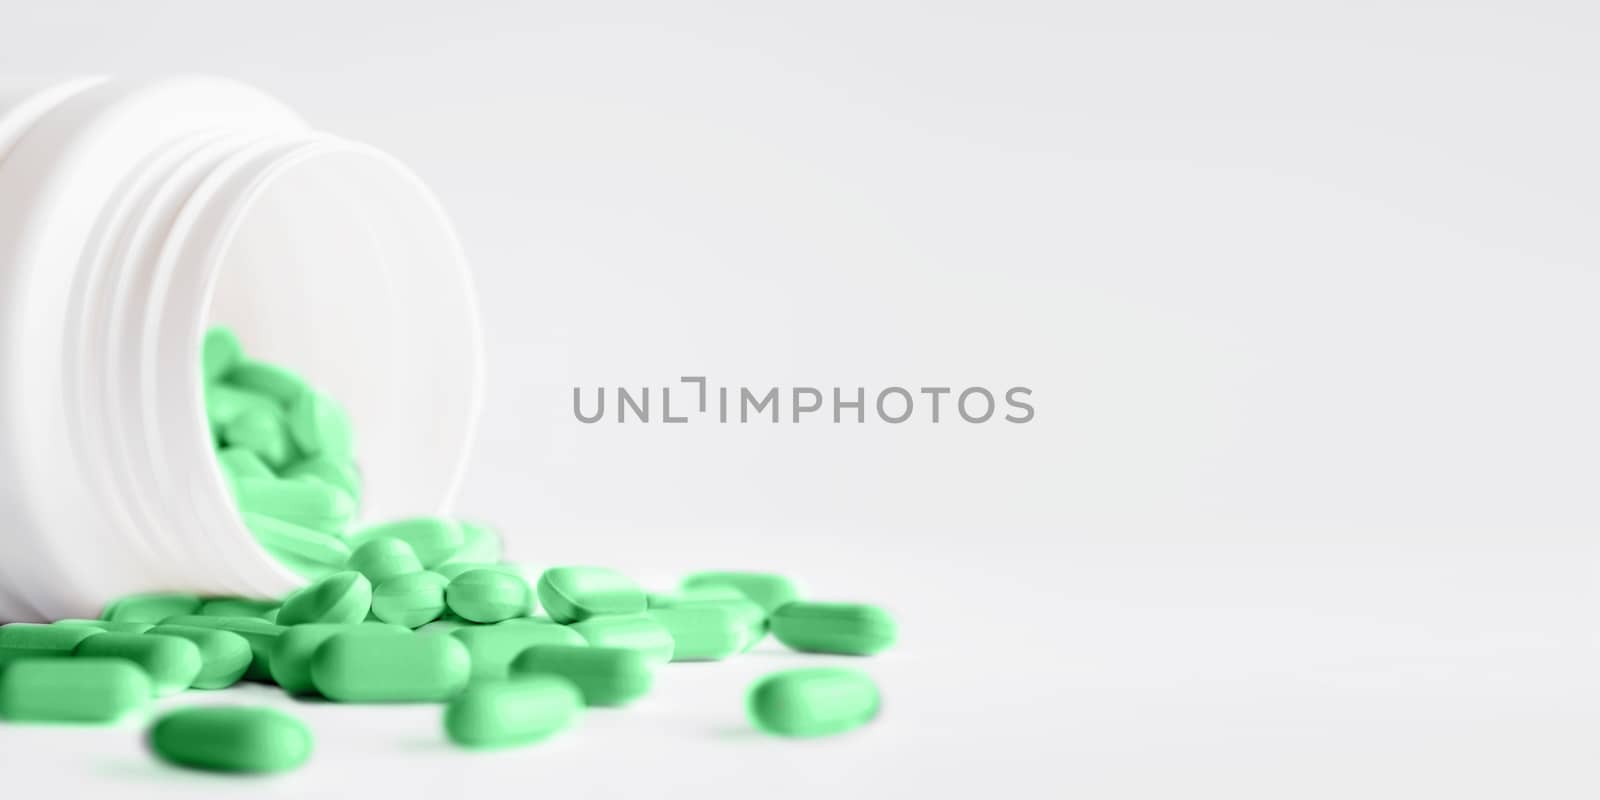 Green pills with spilled out of a plastic jar. Medicine capsules on white background with copy space.